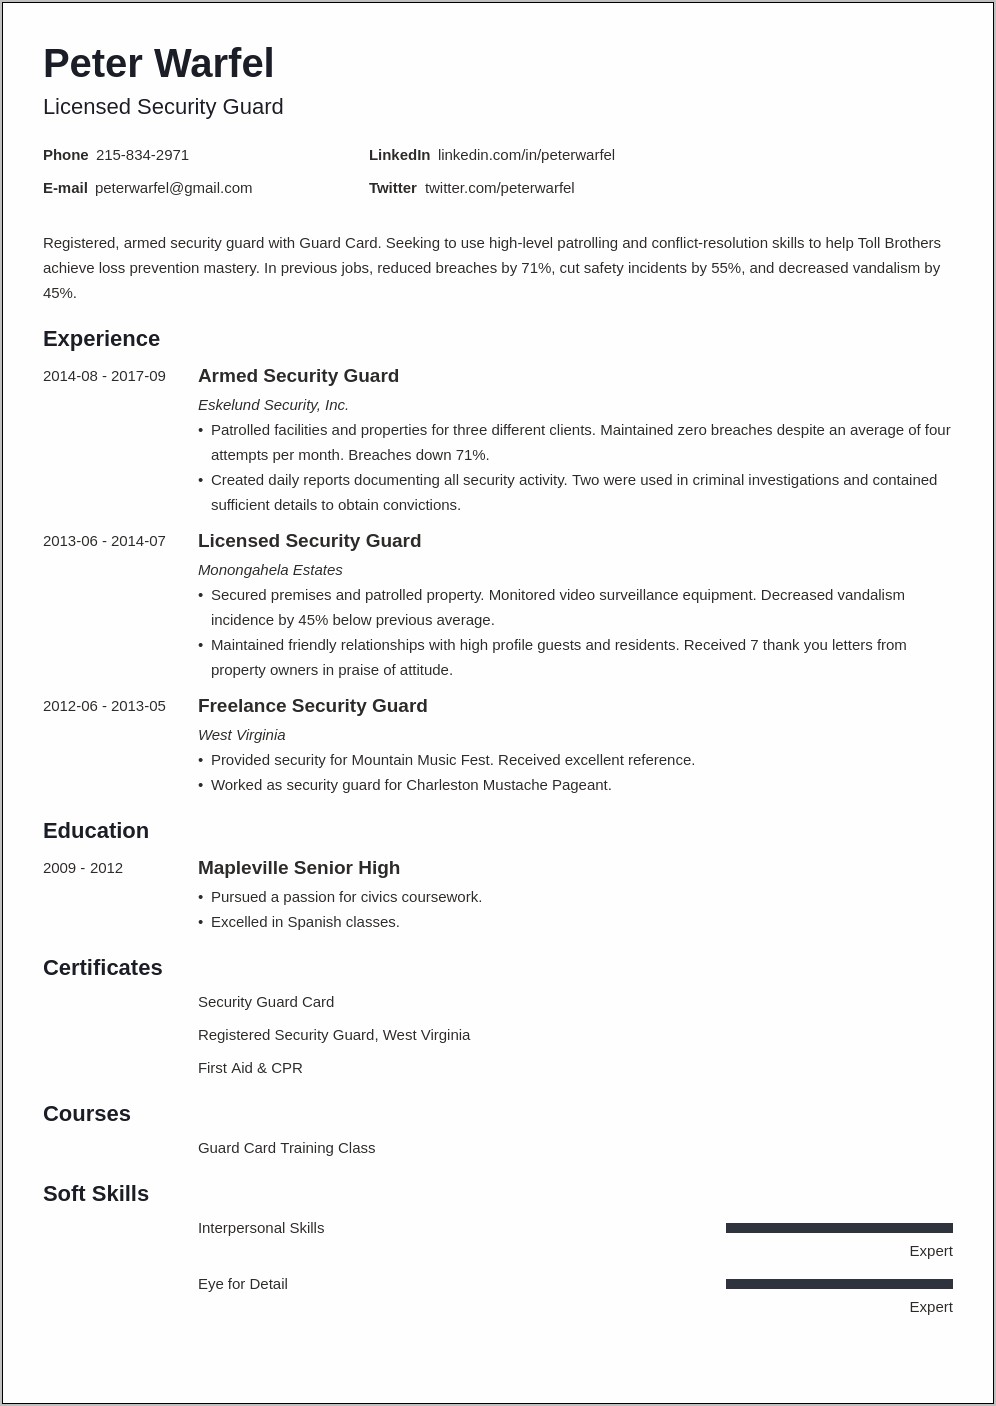 Resume For Security Guard Position With No Experience